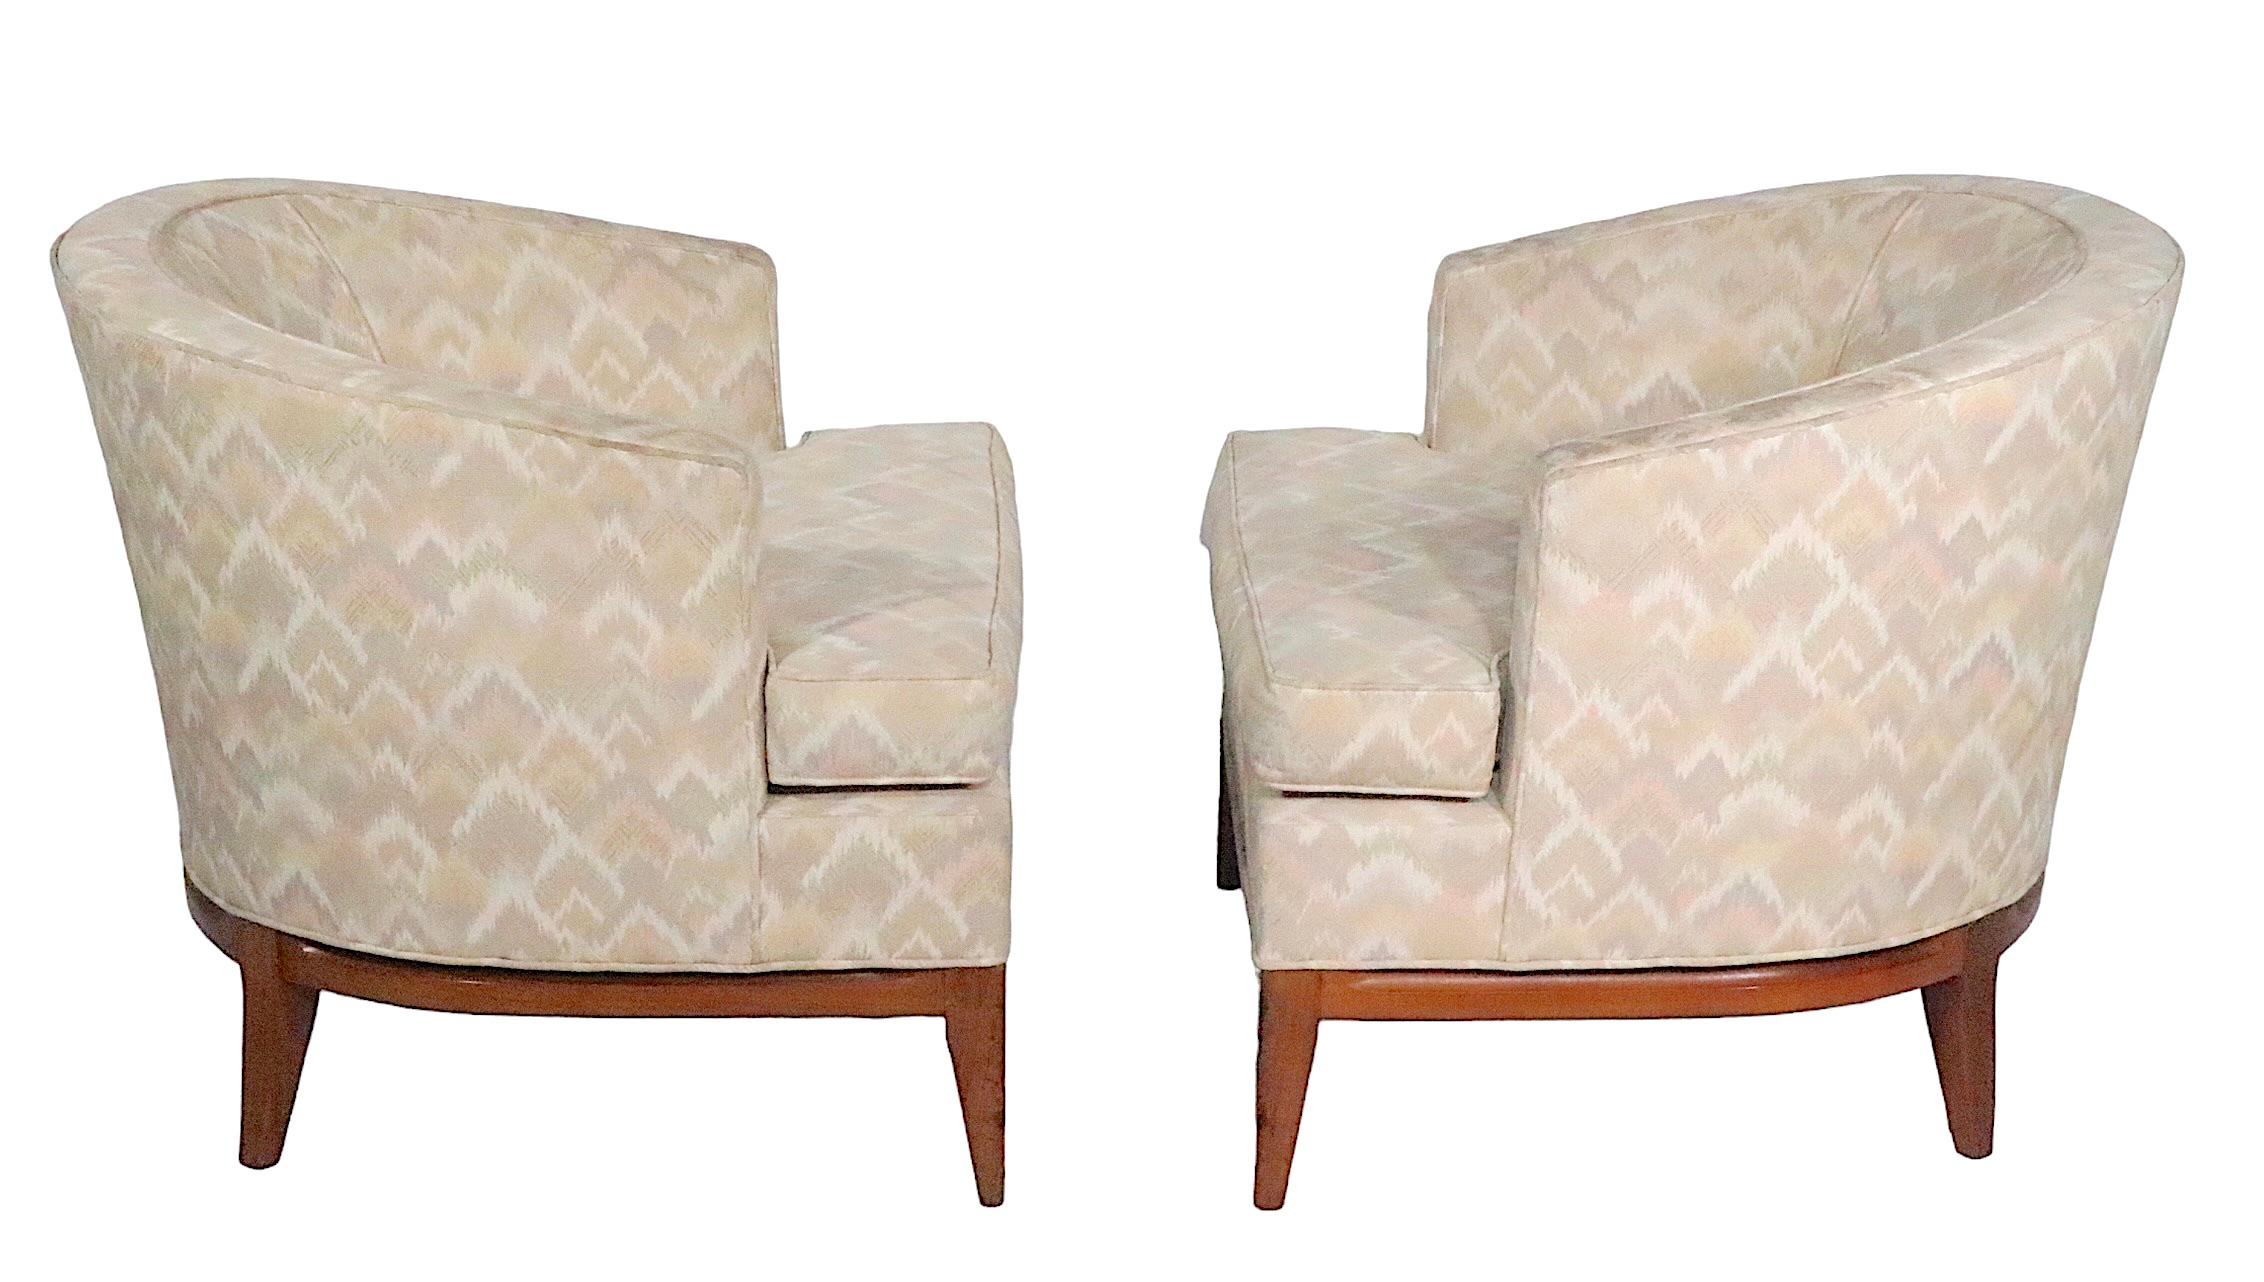 Pair. Mid Century Tub Chairs After Robsjohn Gibbings, circa 1950 - 1960s For Sale 8